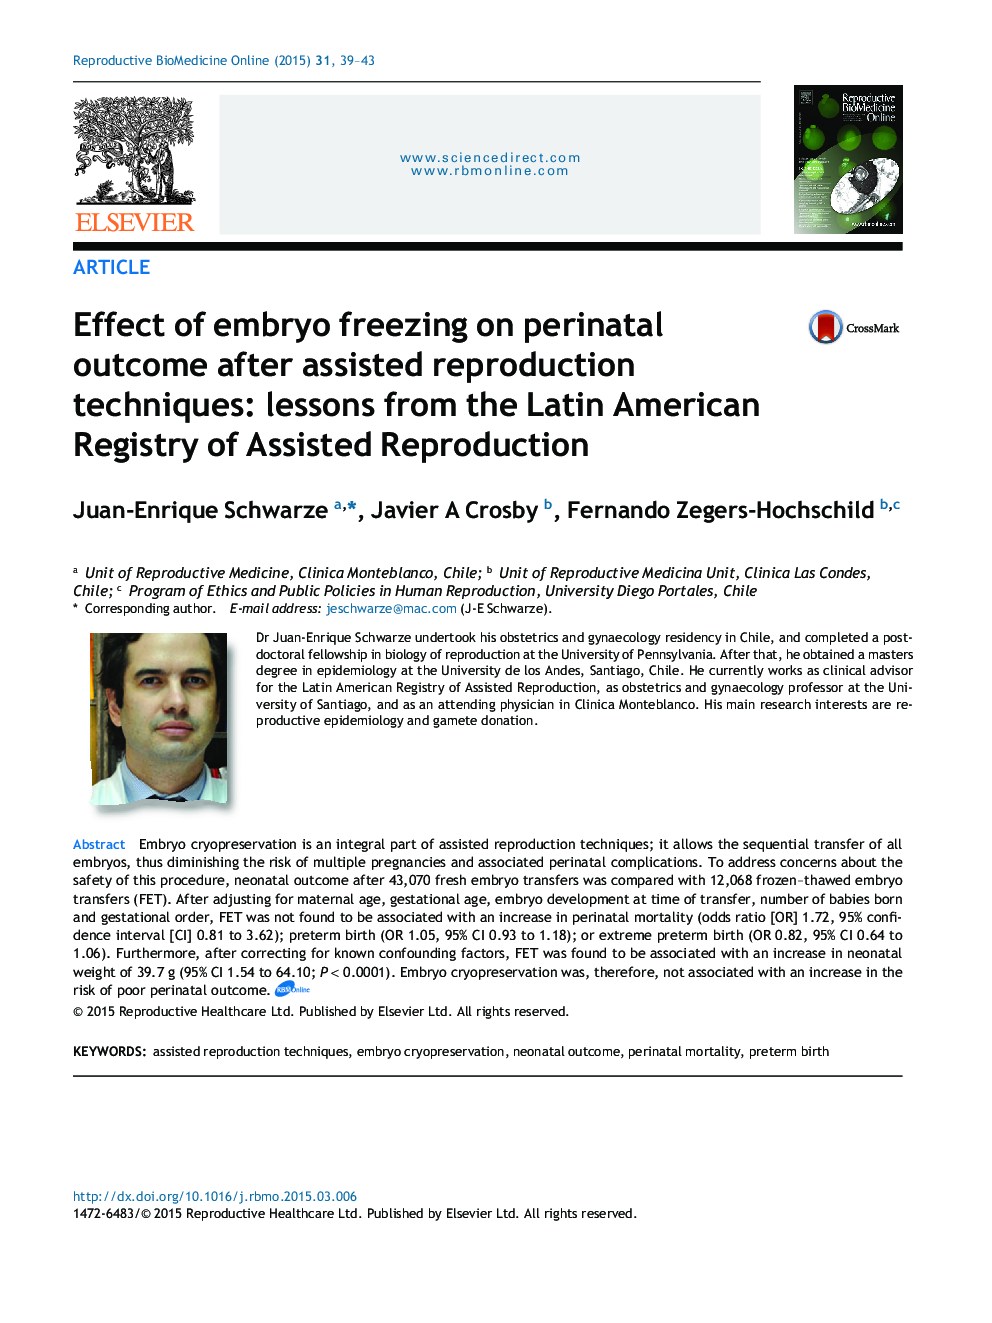 Effect of embryo freezing on perinatal outcome after assisted reproduction techniques: lessons from the Latin American Registry of Assisted Reproduction